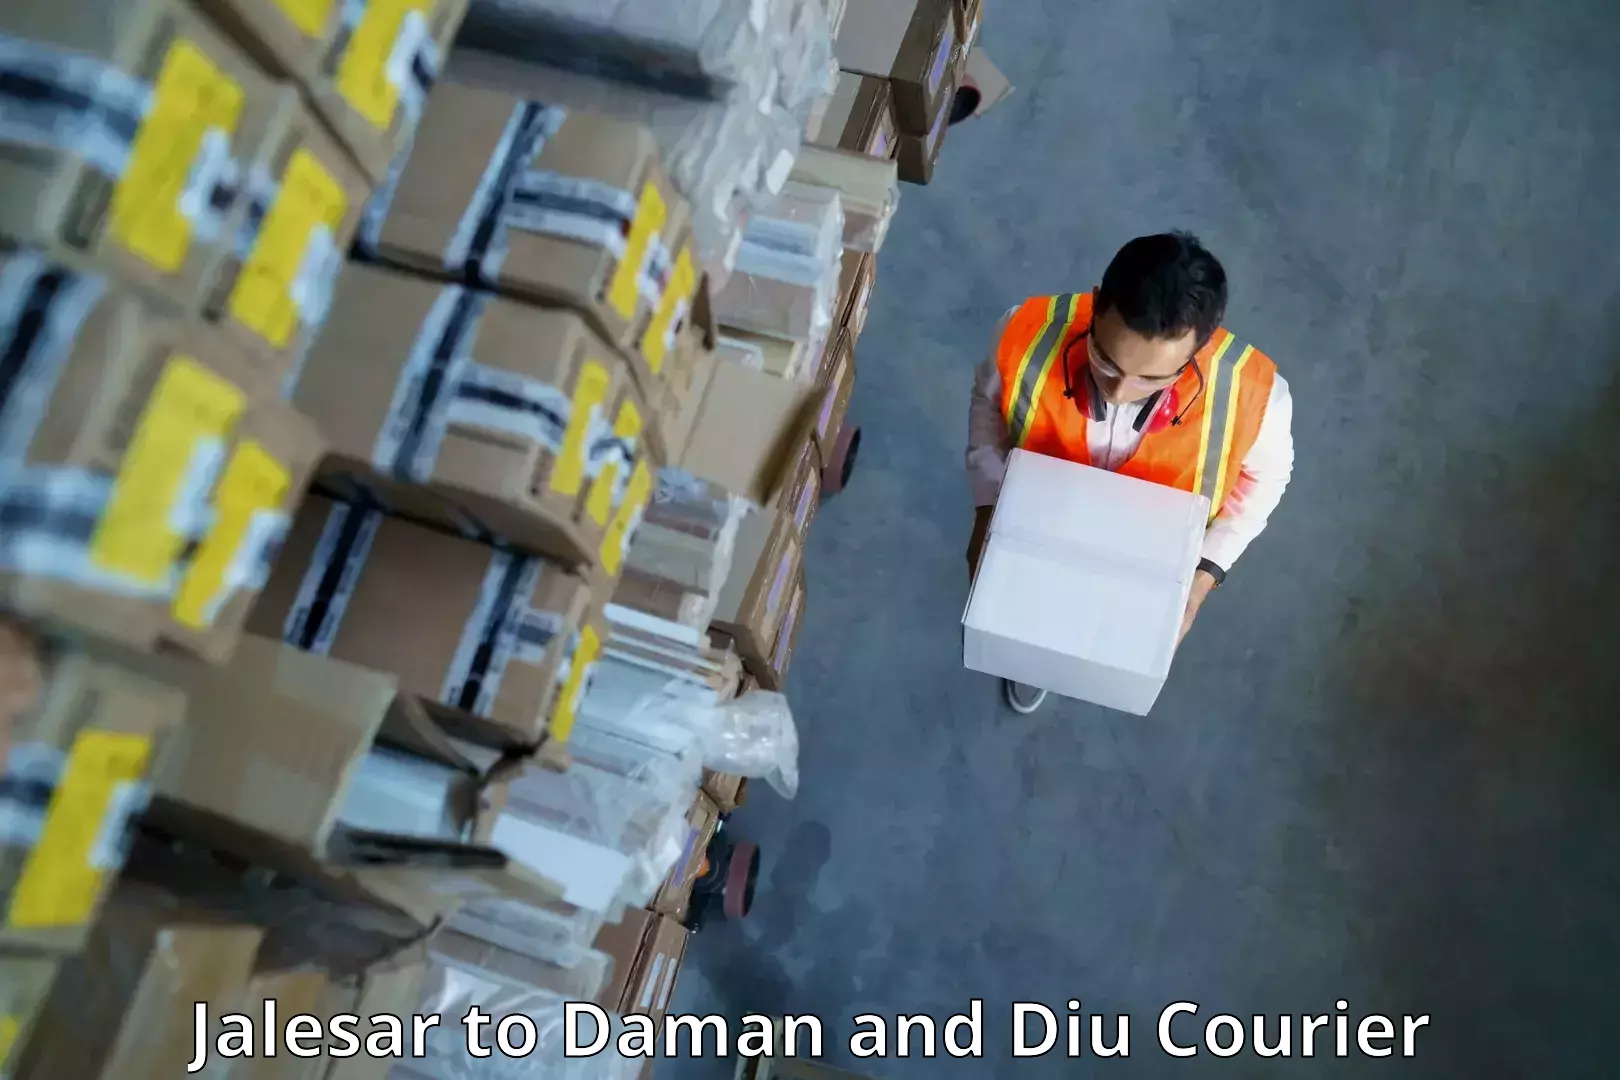 Multi-national courier services Jalesar to Daman and Diu